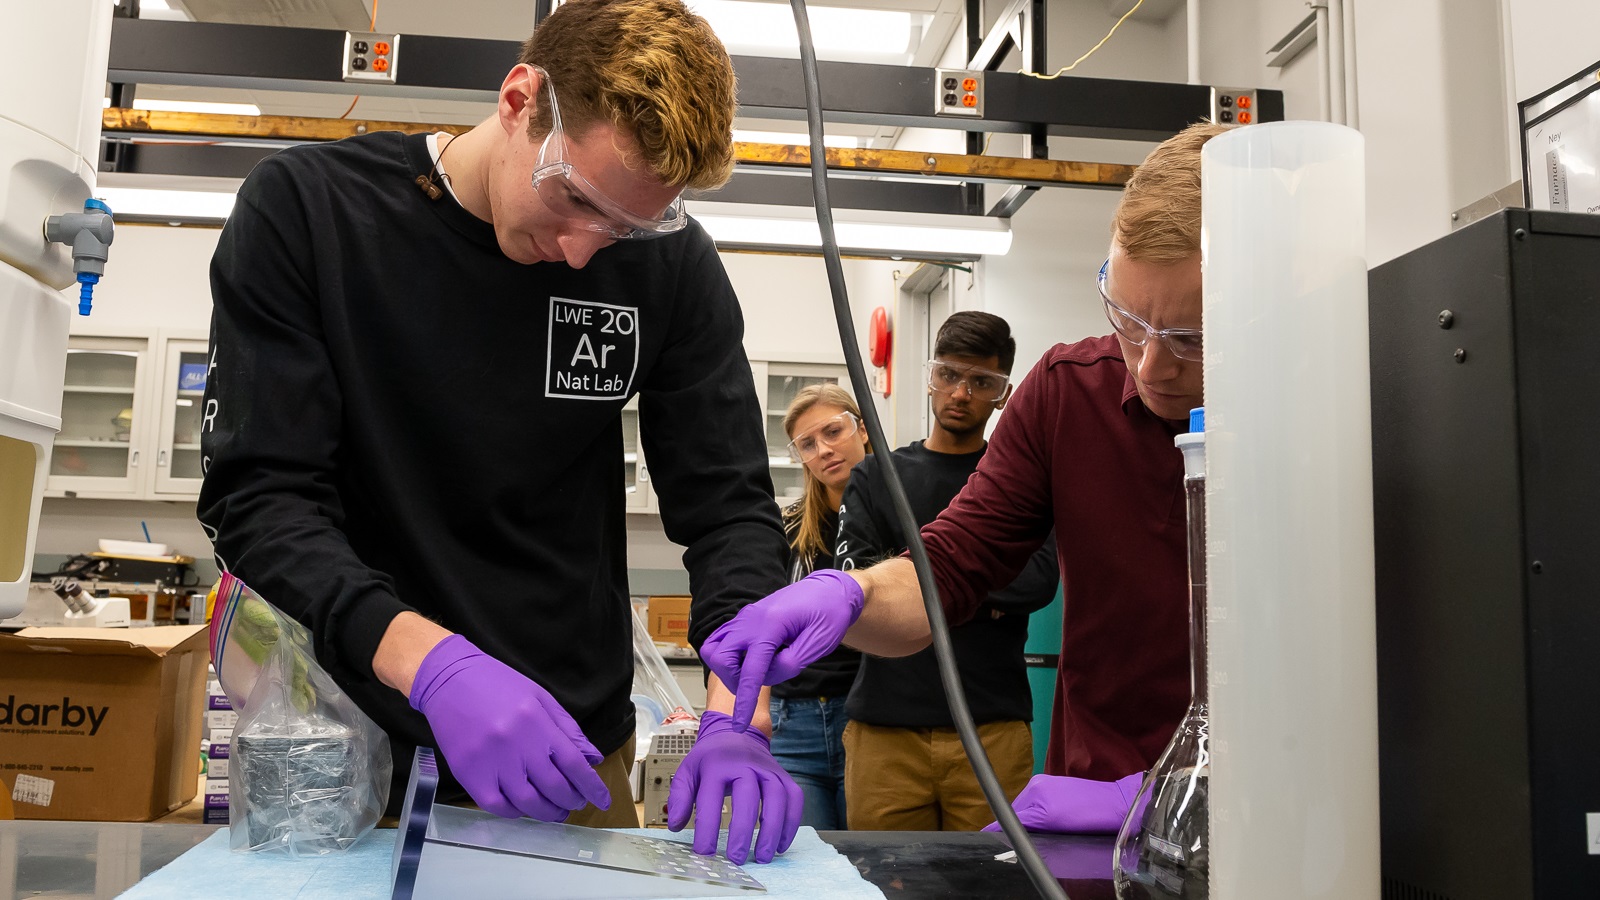 Students from Lincoln-Way East High School in Frankfort work with XSD physicist George Sterbinsky at the aps in February 2020 as part of the ESRP. Students used the APS to experiment with detoxification of metals harmful to the environment. (Image by Mark Lopez/Argonne)